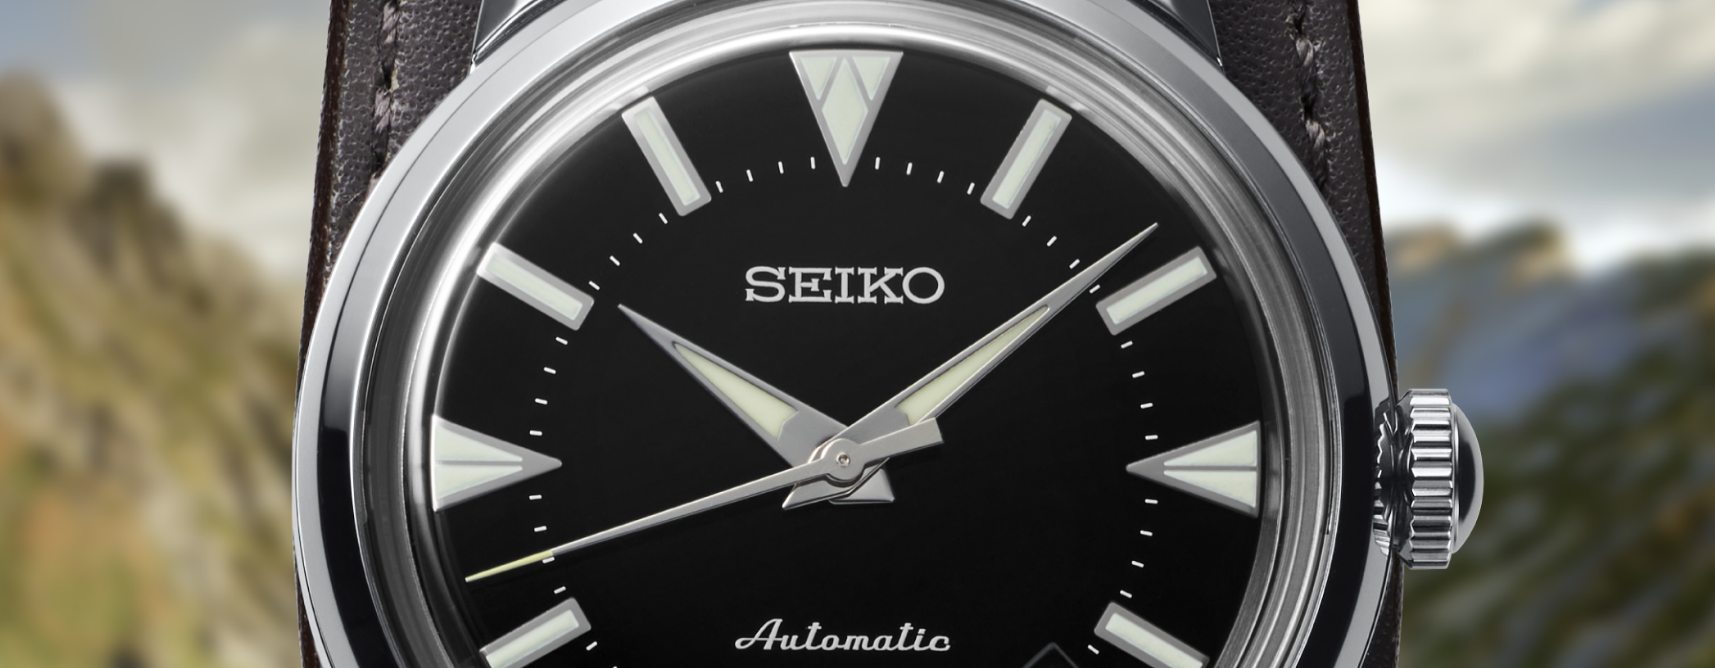 The 1959 Seiko Alpinist Re-creation - First Class Watches Blog